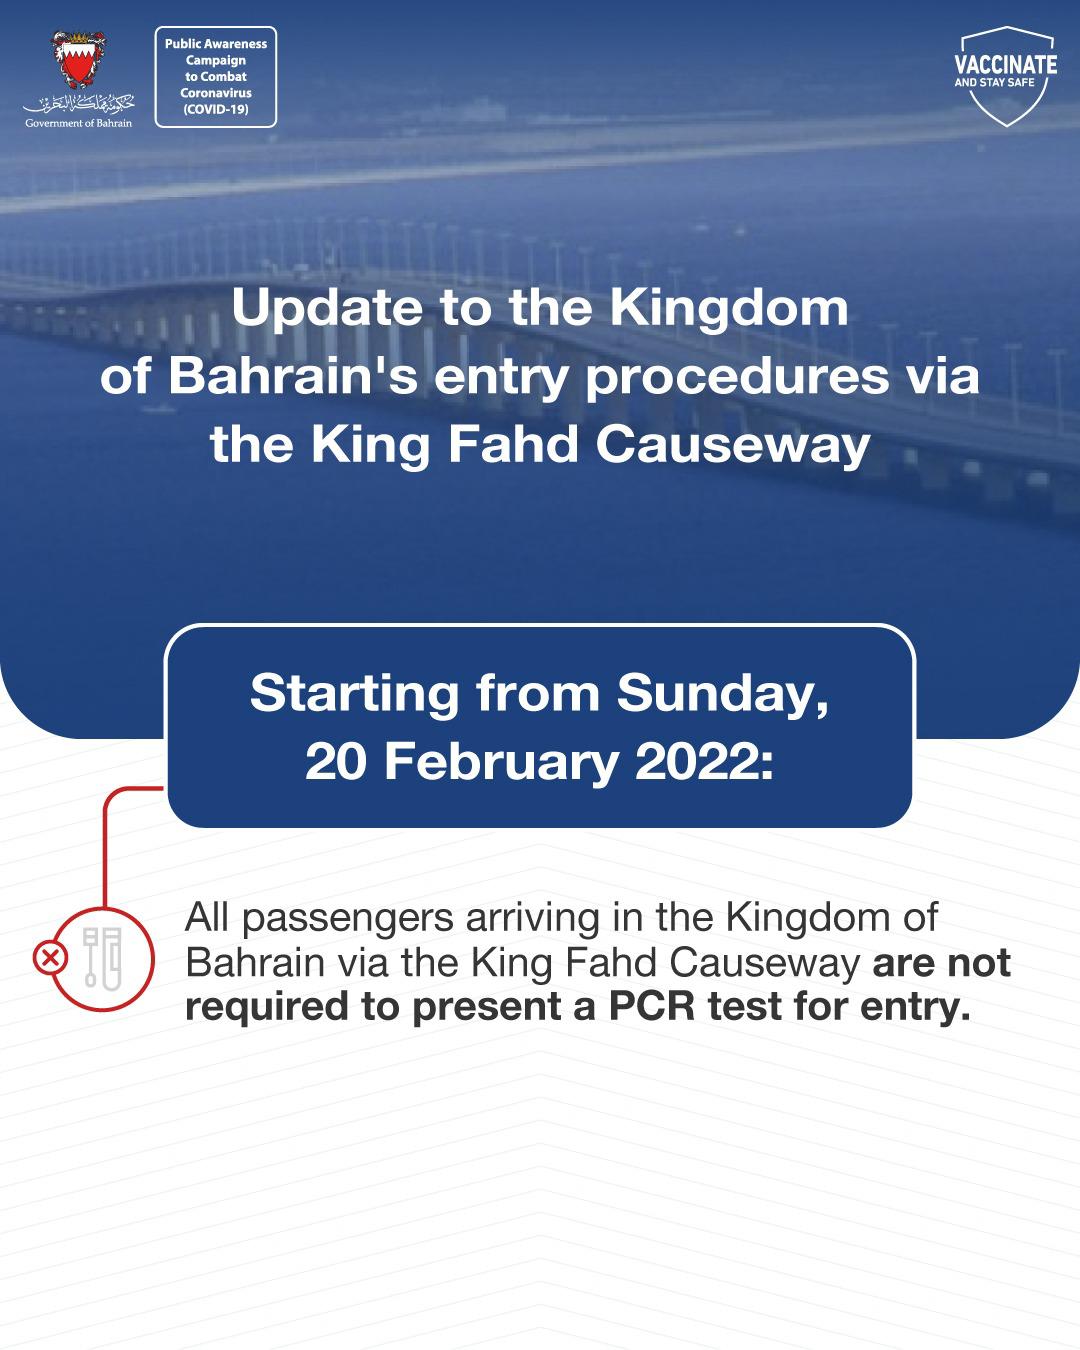 Update to the Kingdom of Bahrain's entry procedures via the King Fahd Causeway